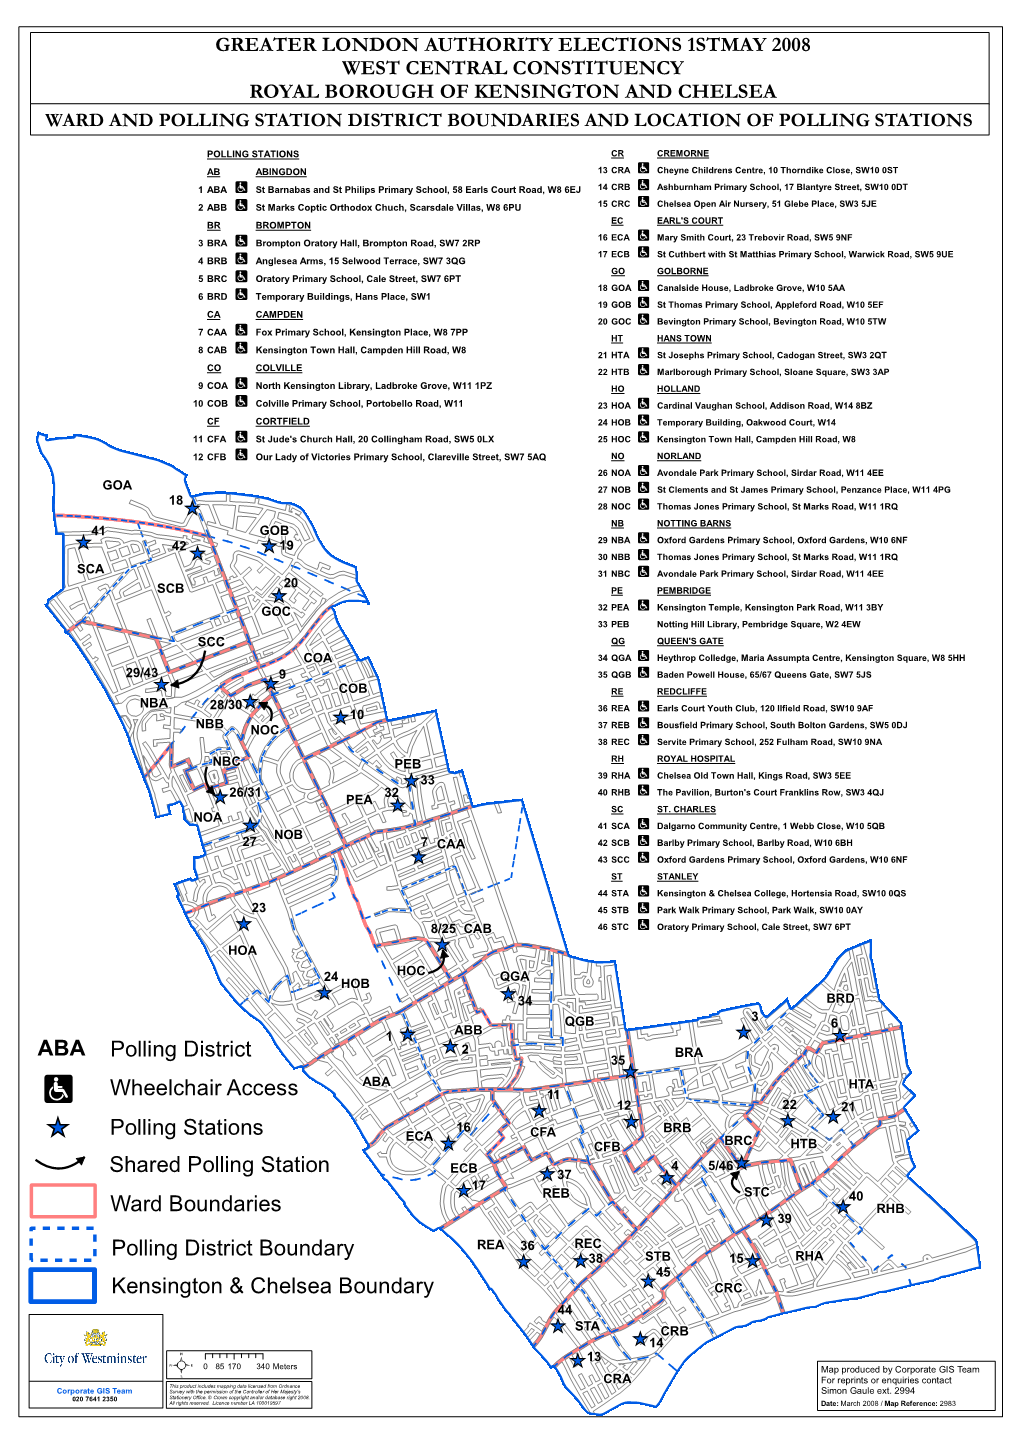 Ward and Polling Station District Boundaries and Location of Polling Stations